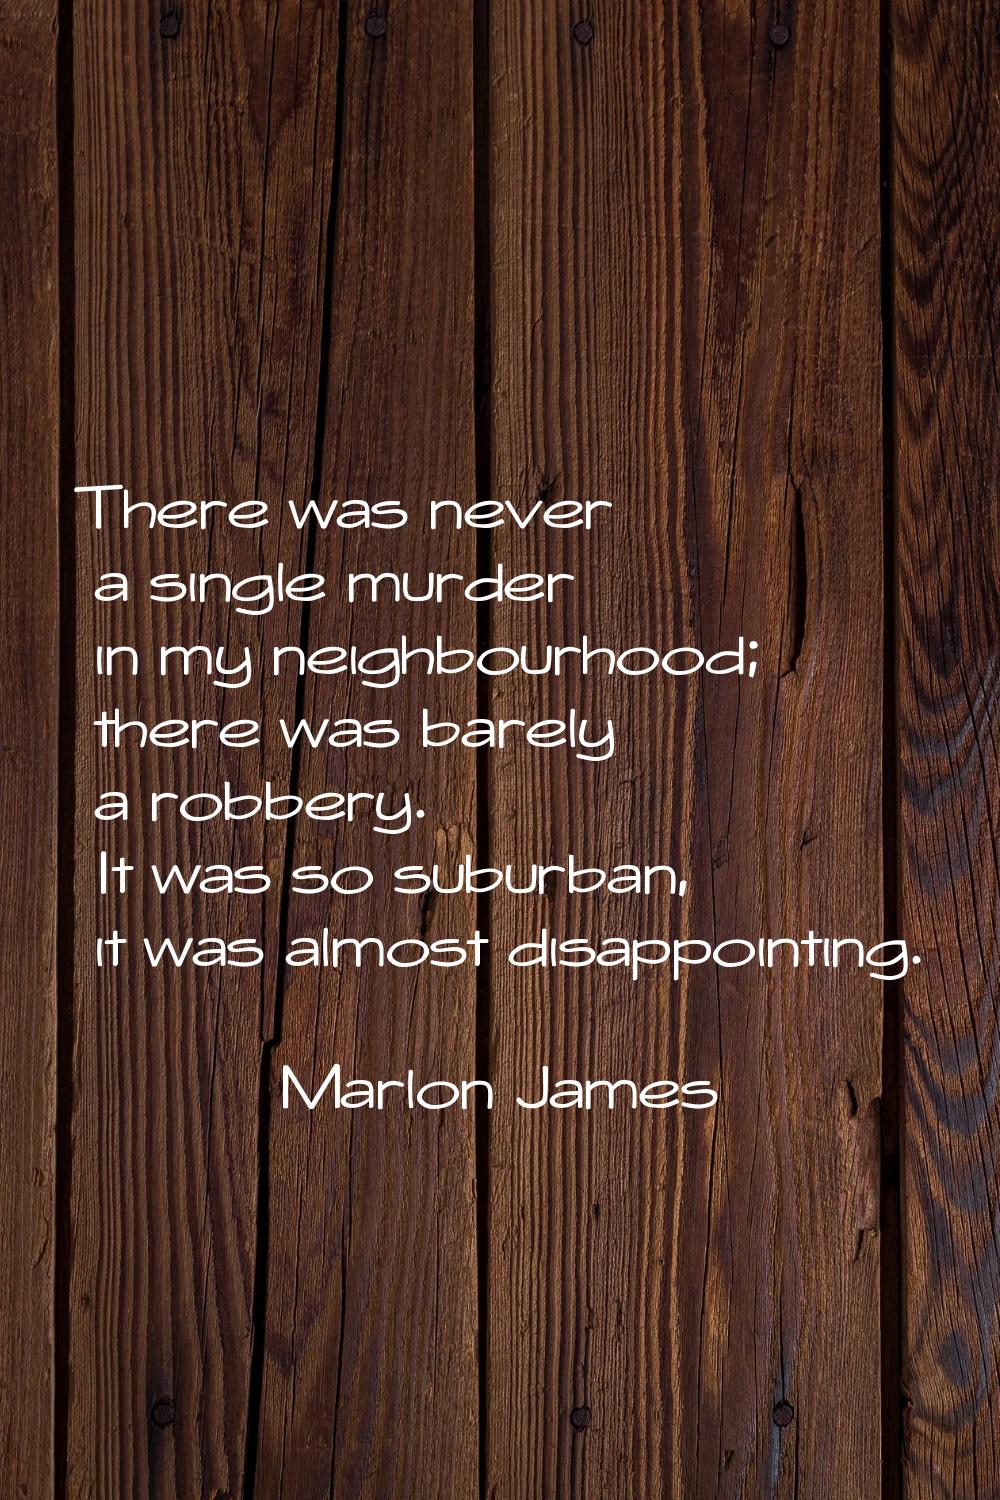 There was never a single murder in my neighbourhood; there was barely a robbery. It was so suburban